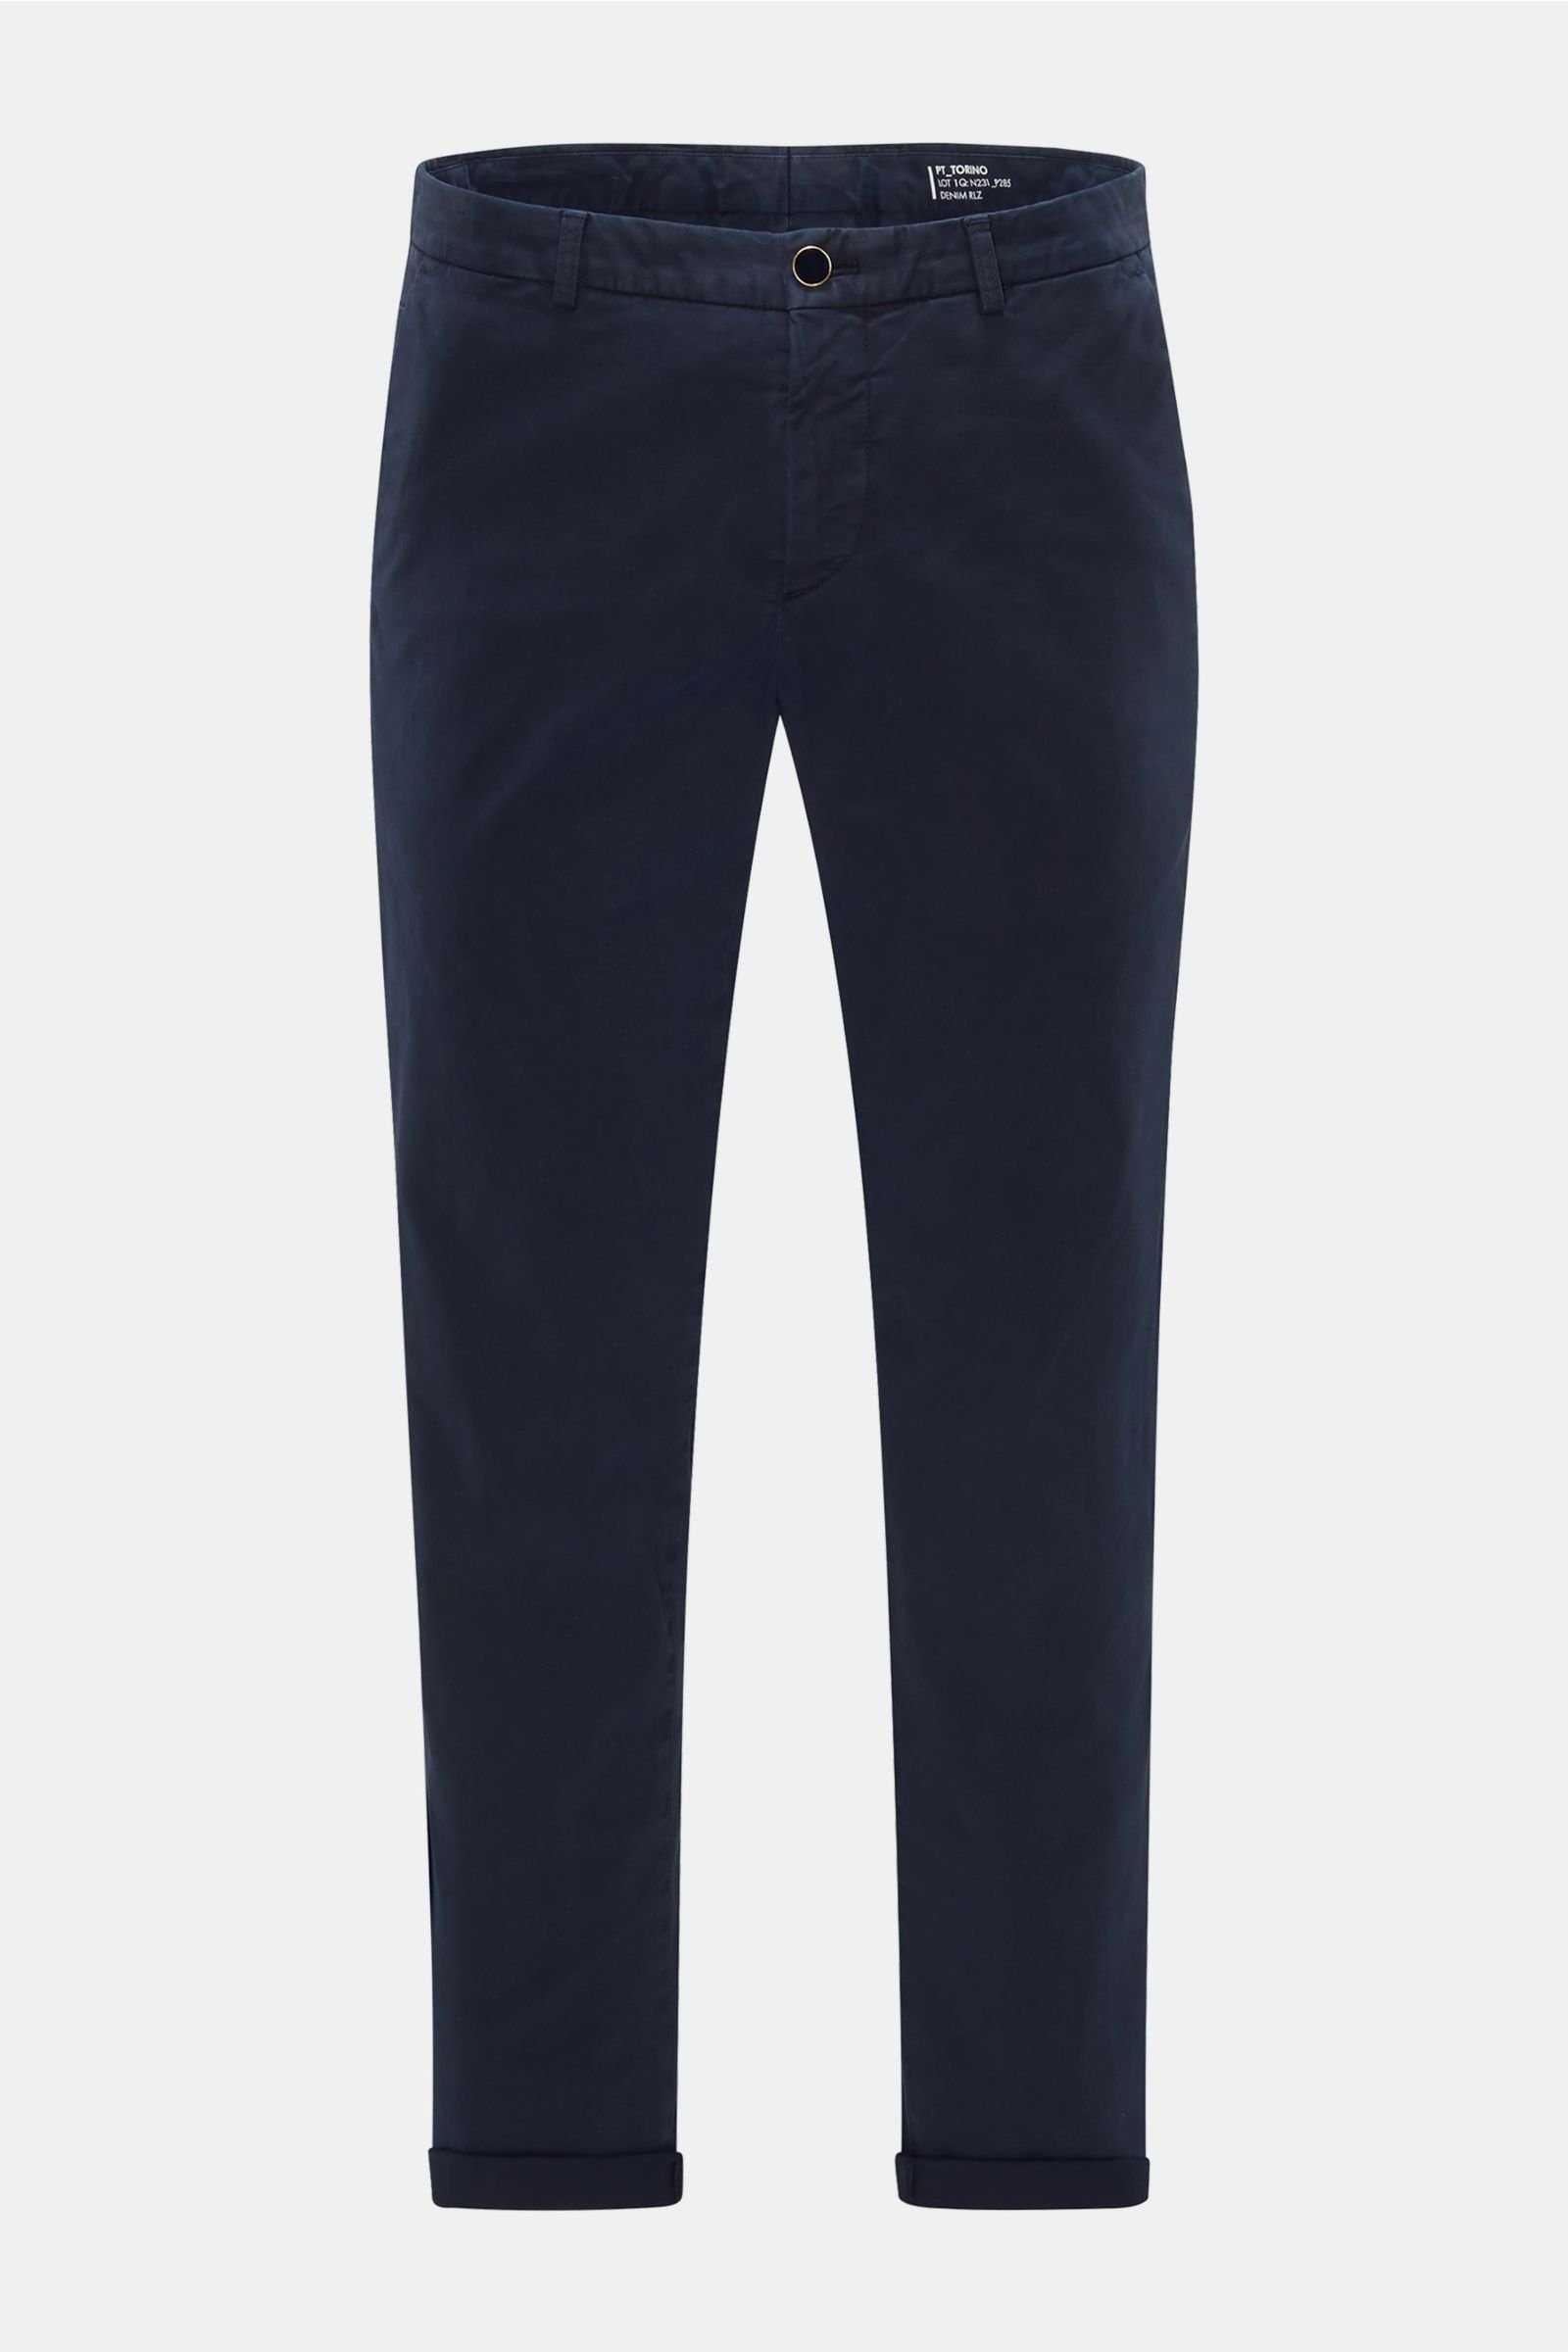 Cotton trousers 'Funky' navy